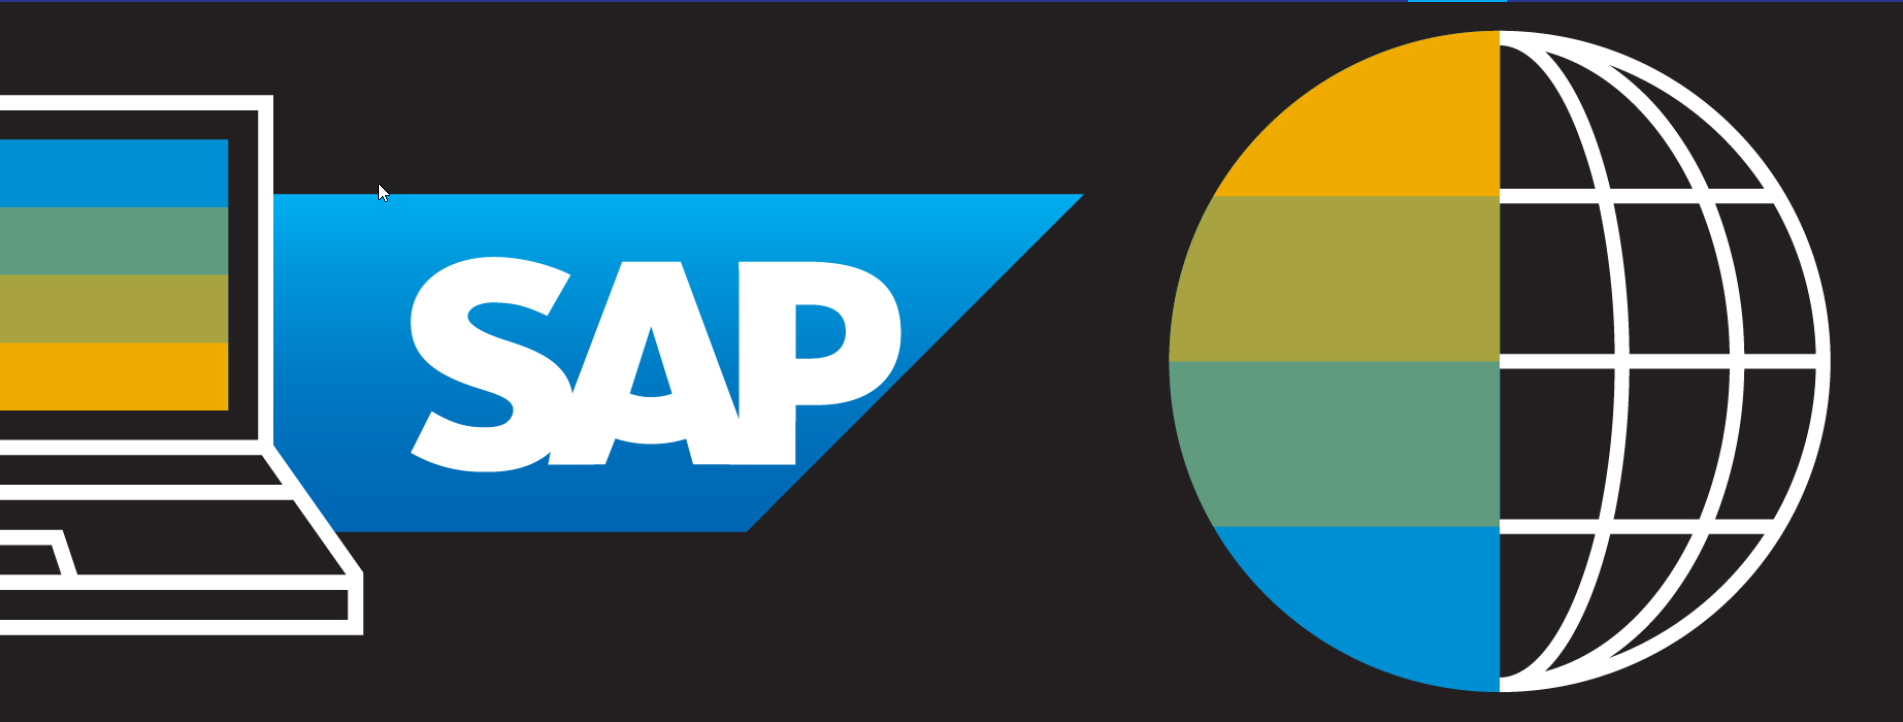 Get Awesome Tips To Pass The SAP Certified Application Associate Exam In 2021